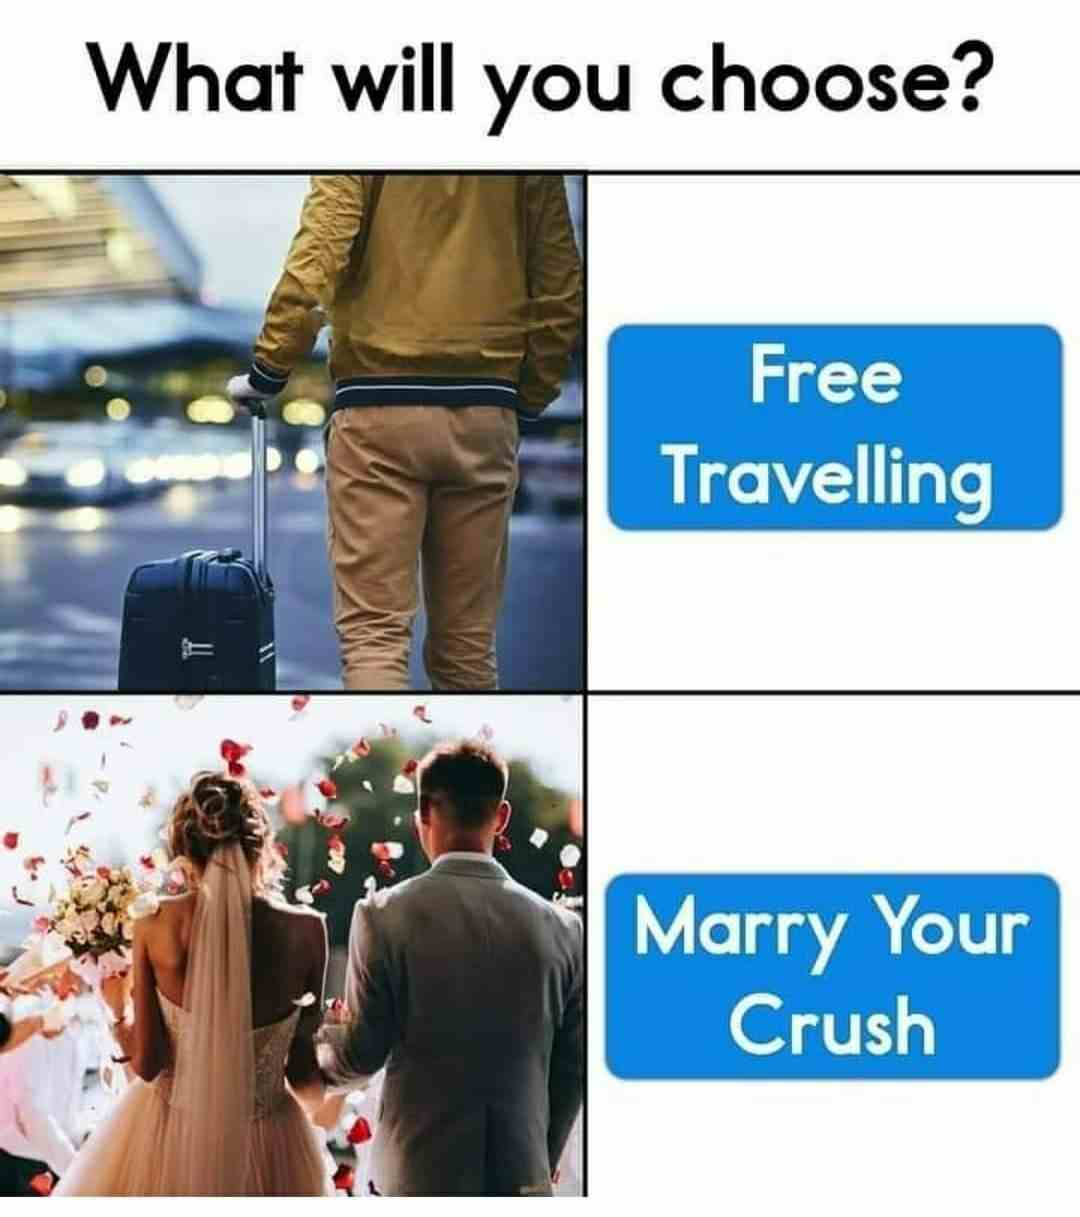 What will you choose? Traveling or Crush